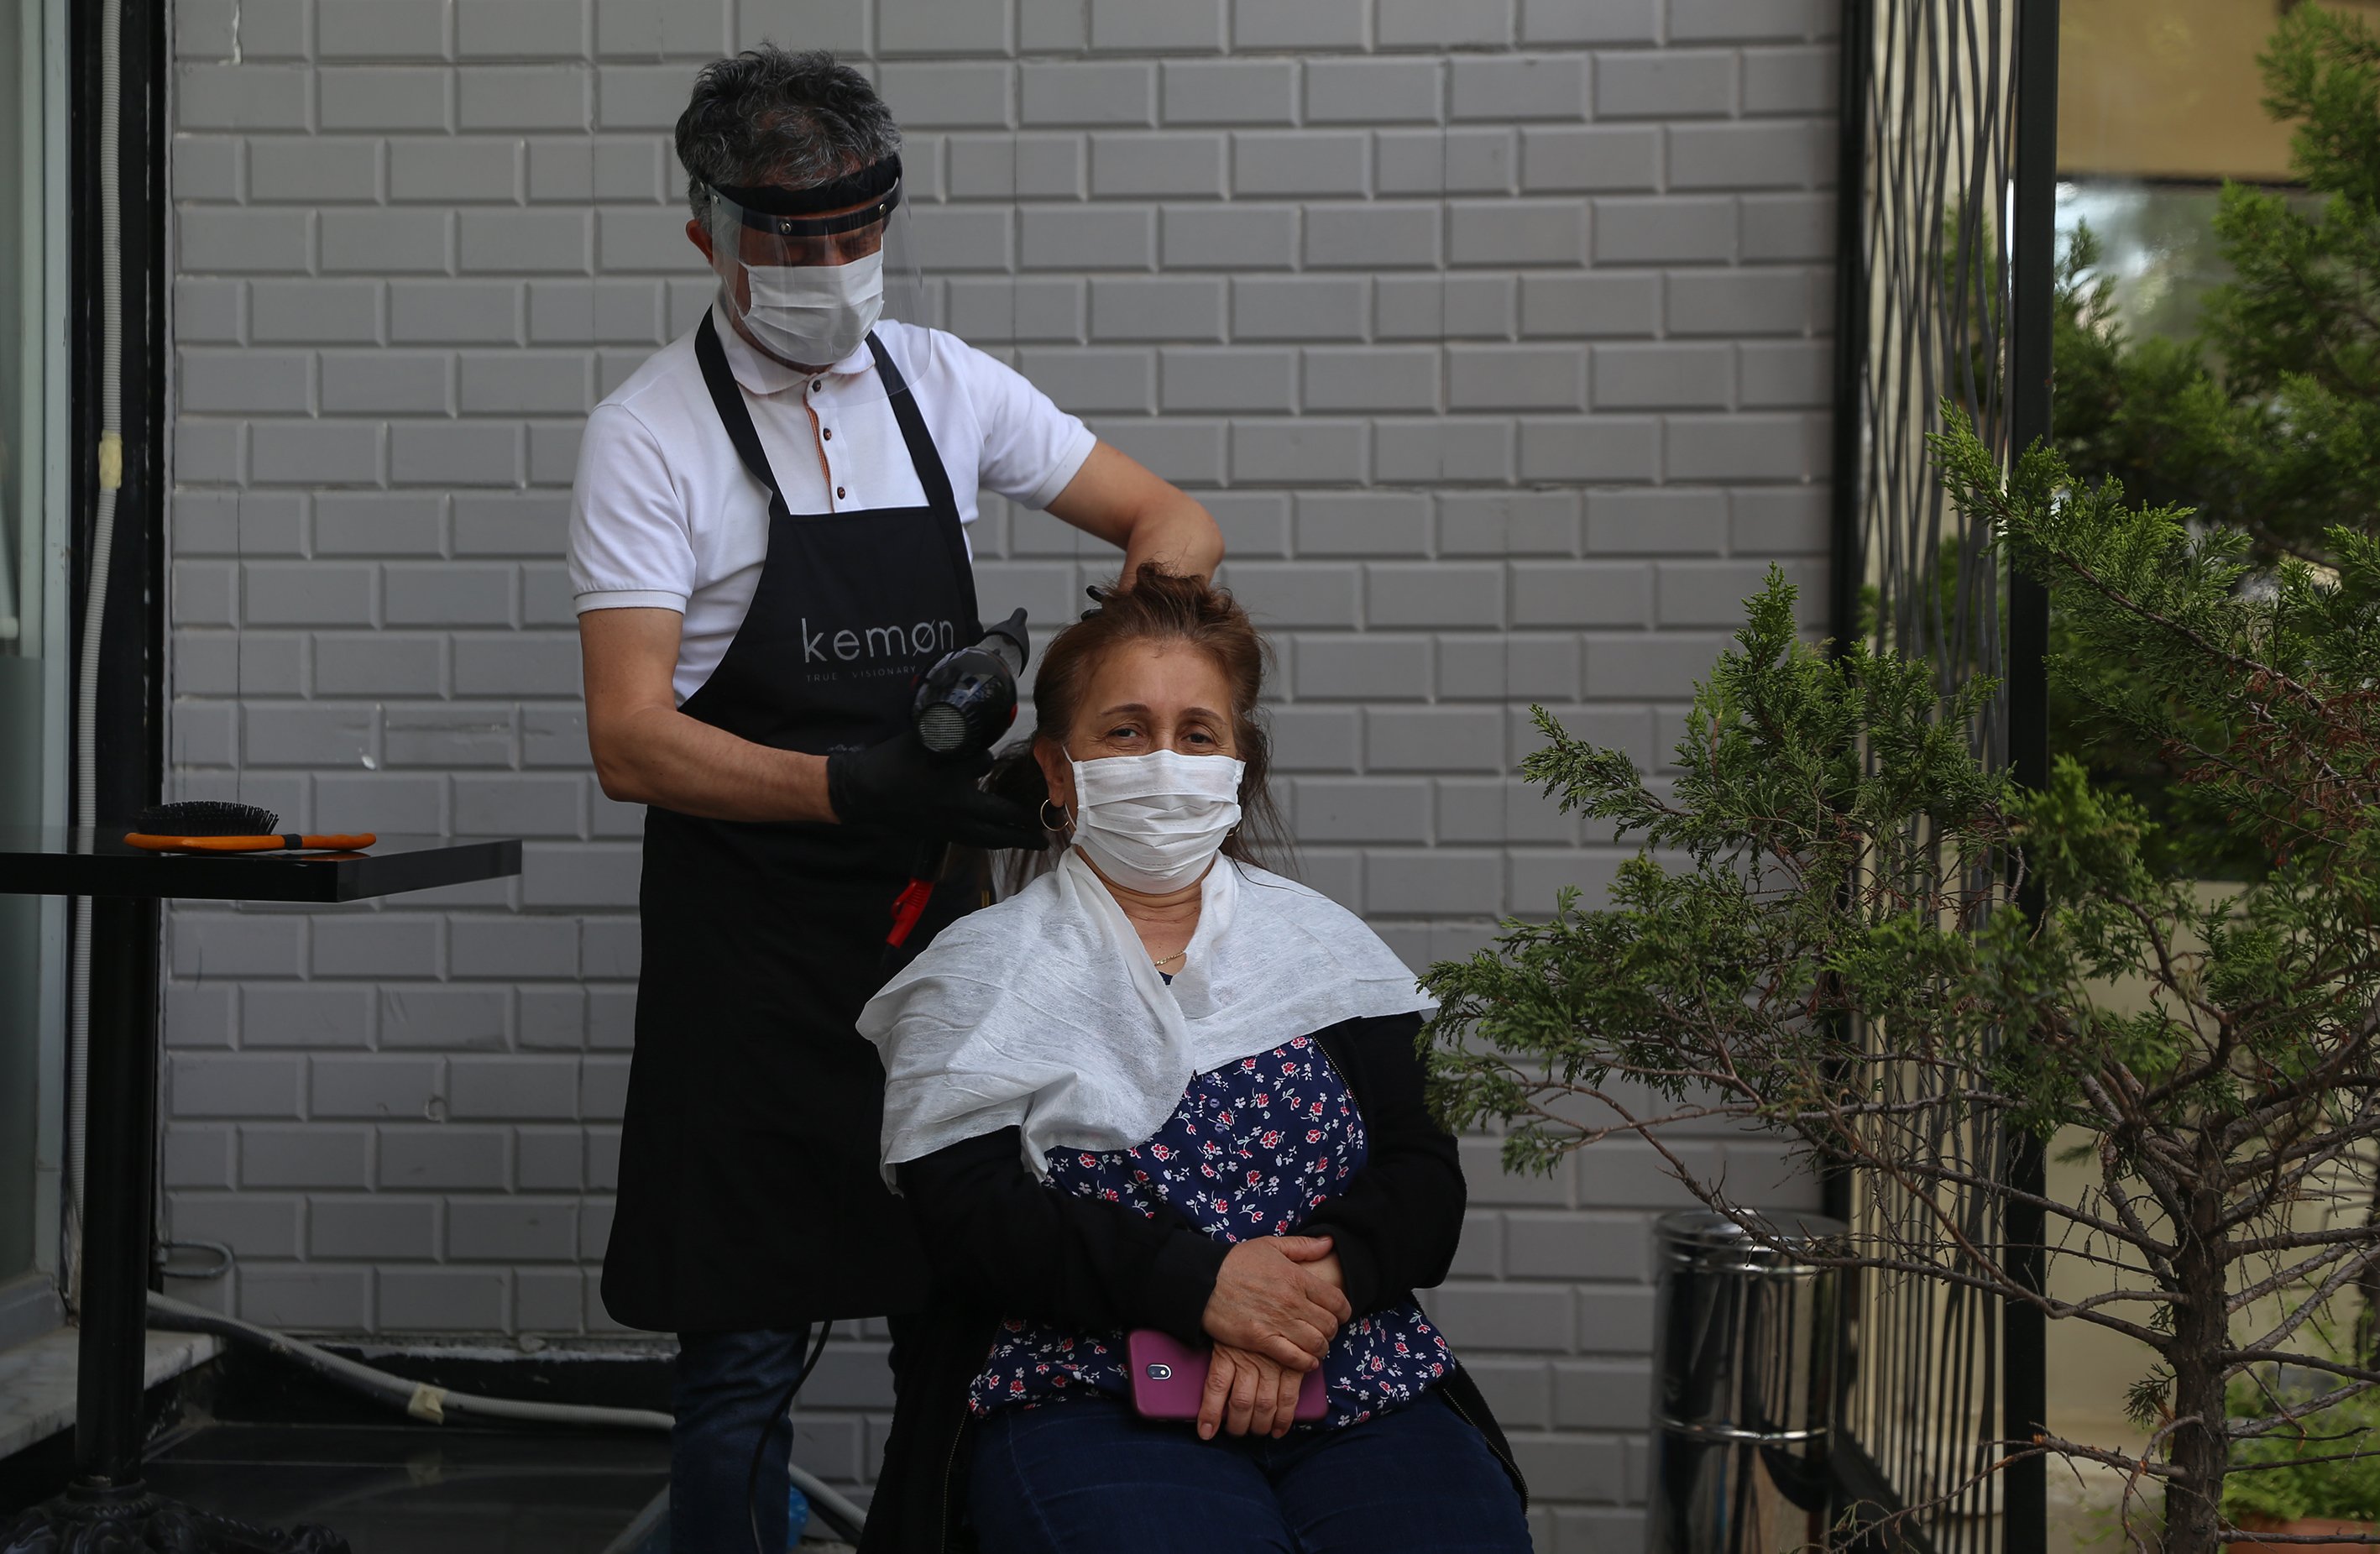 Hairdressers are now operating on an appointment-only system. (AA Photo)